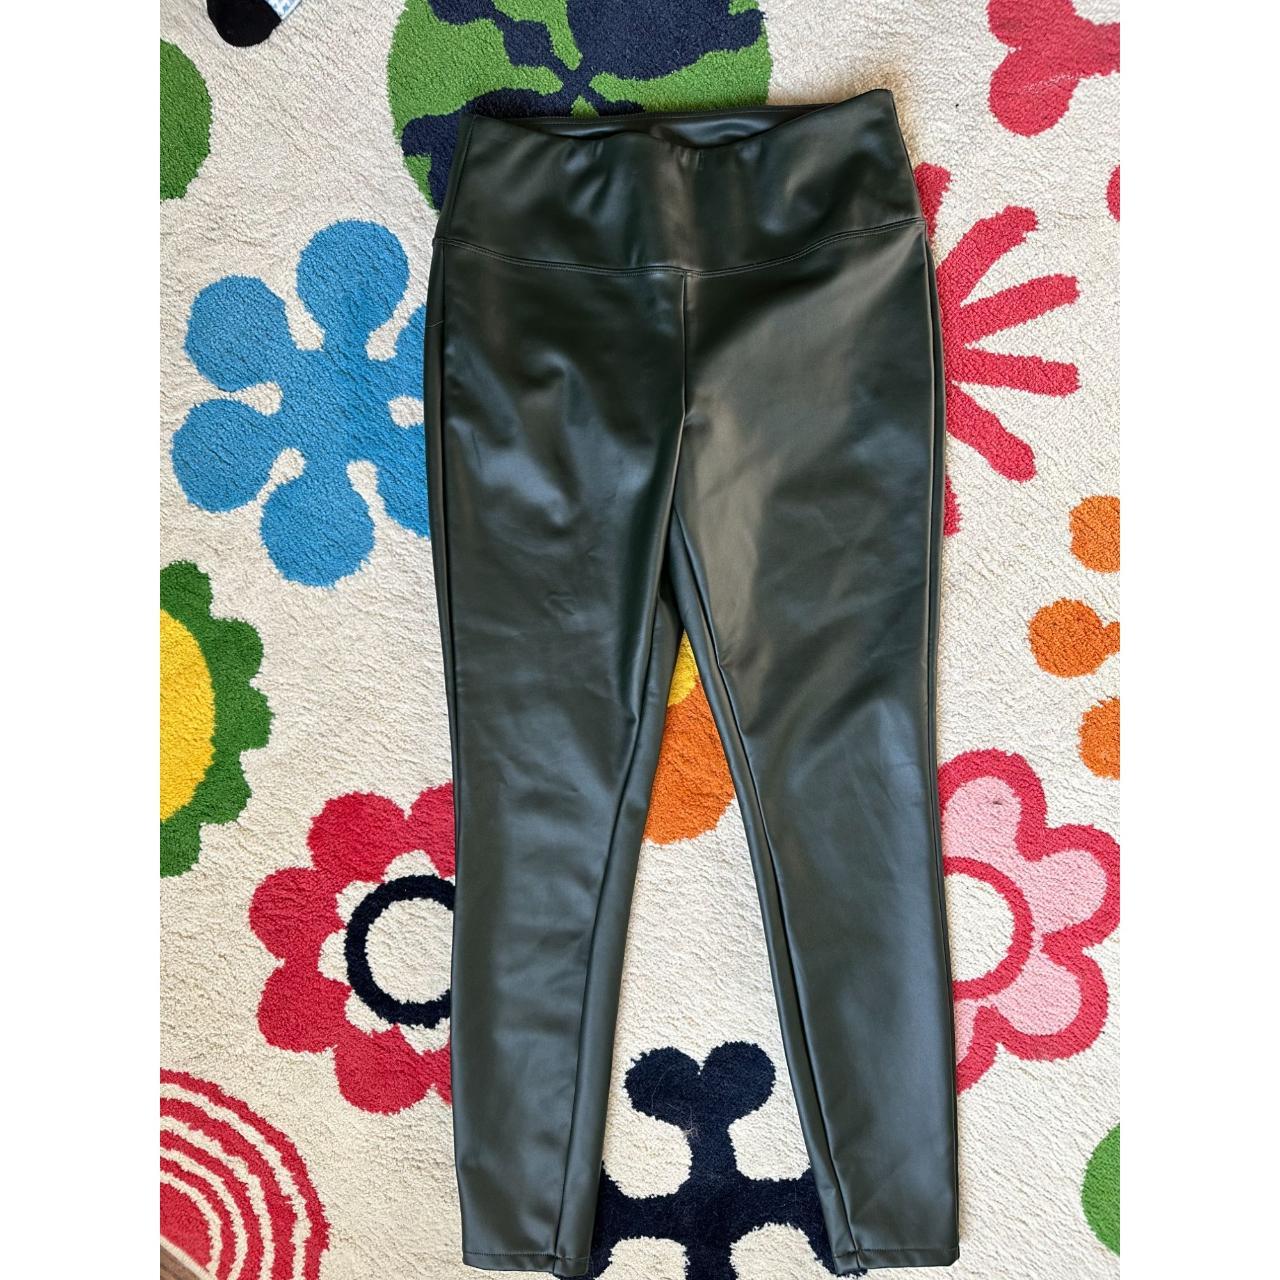 Target brand A New Day Faux Leather Leggings. Black - Depop